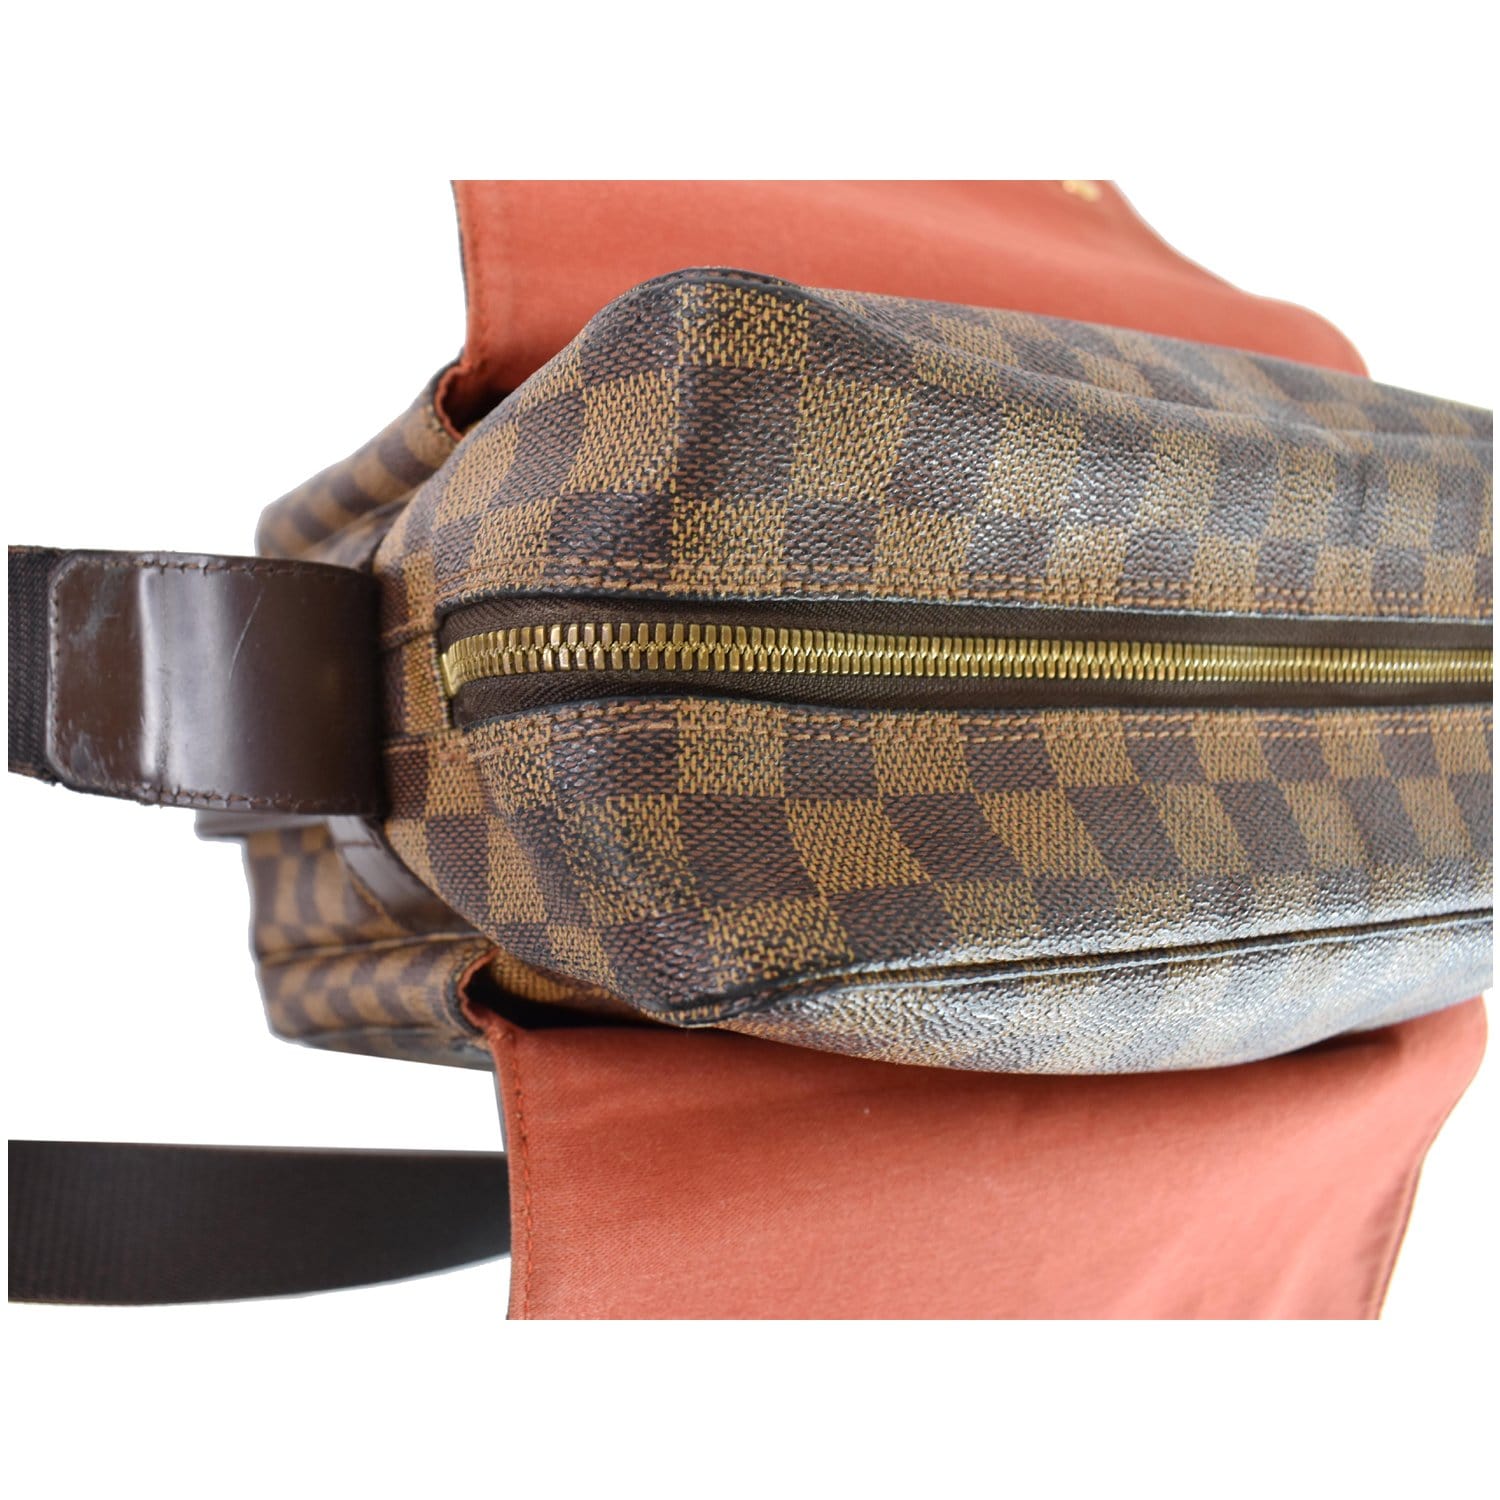 LOUIS VUITTON DAMIER EBENE NAVIGLIO SHOULDER/MESSENGER BAG, with adjustable  dark brown fabric shoulder strap, gold tone hardware and dark brown leather  trims, top zip closure and two overlaying flaps with snap closure